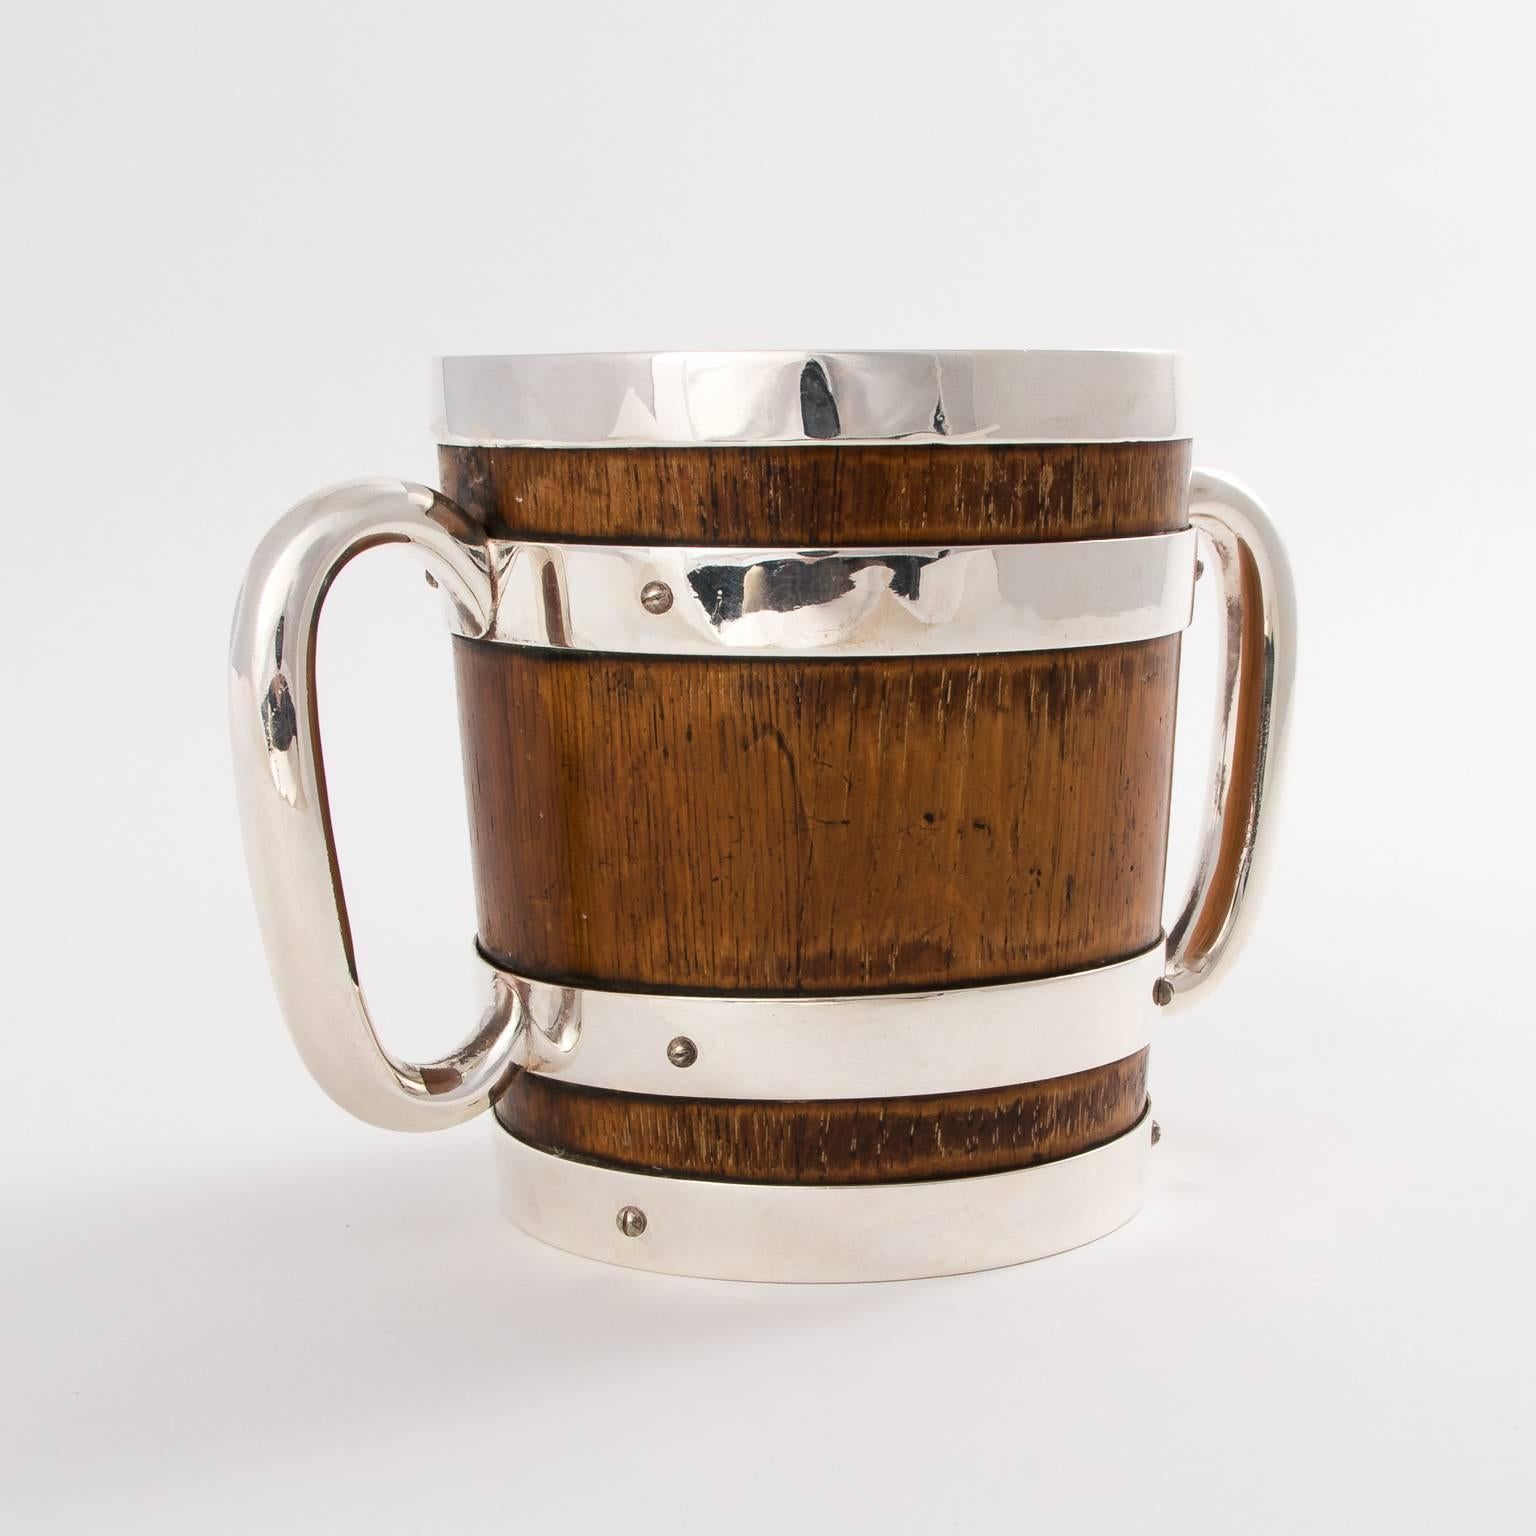 Oak and silver plated ice pail, circa 1920.
 